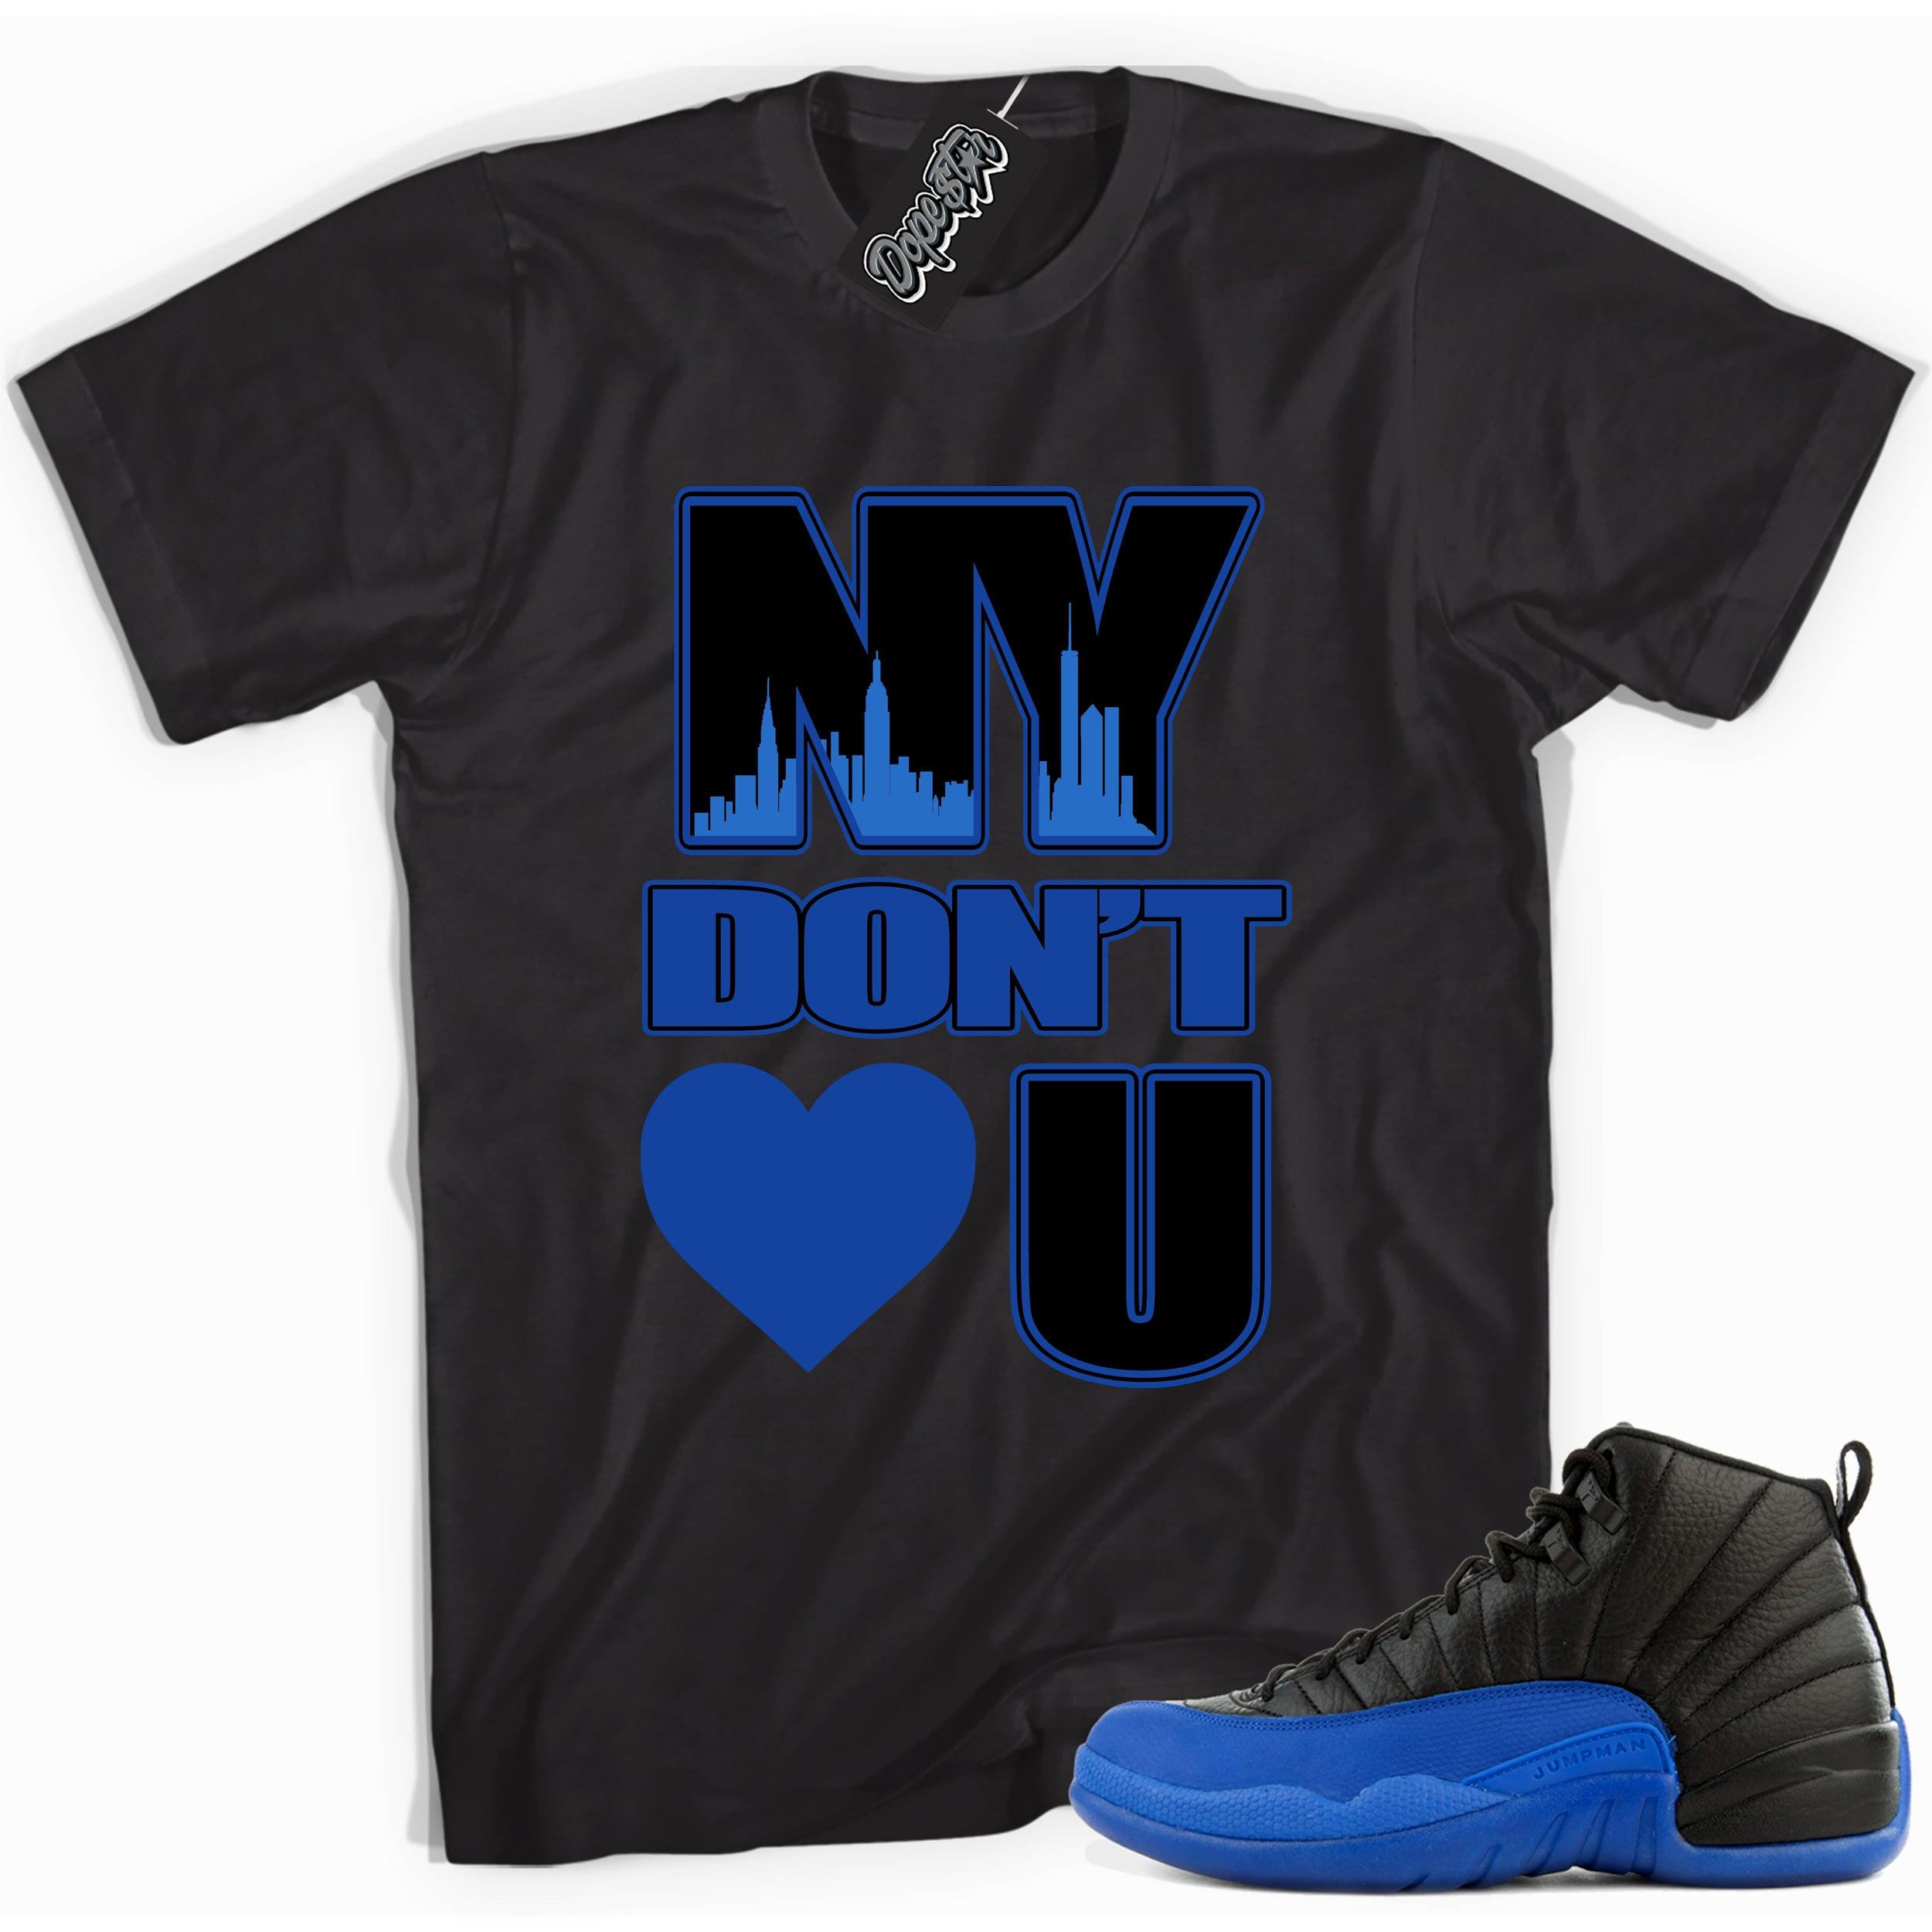 Cool black graphic tee with 'ny dont <3 you' print, that perfectly matches  Air Jordan 12 Retro Black Game Royal sneakers.